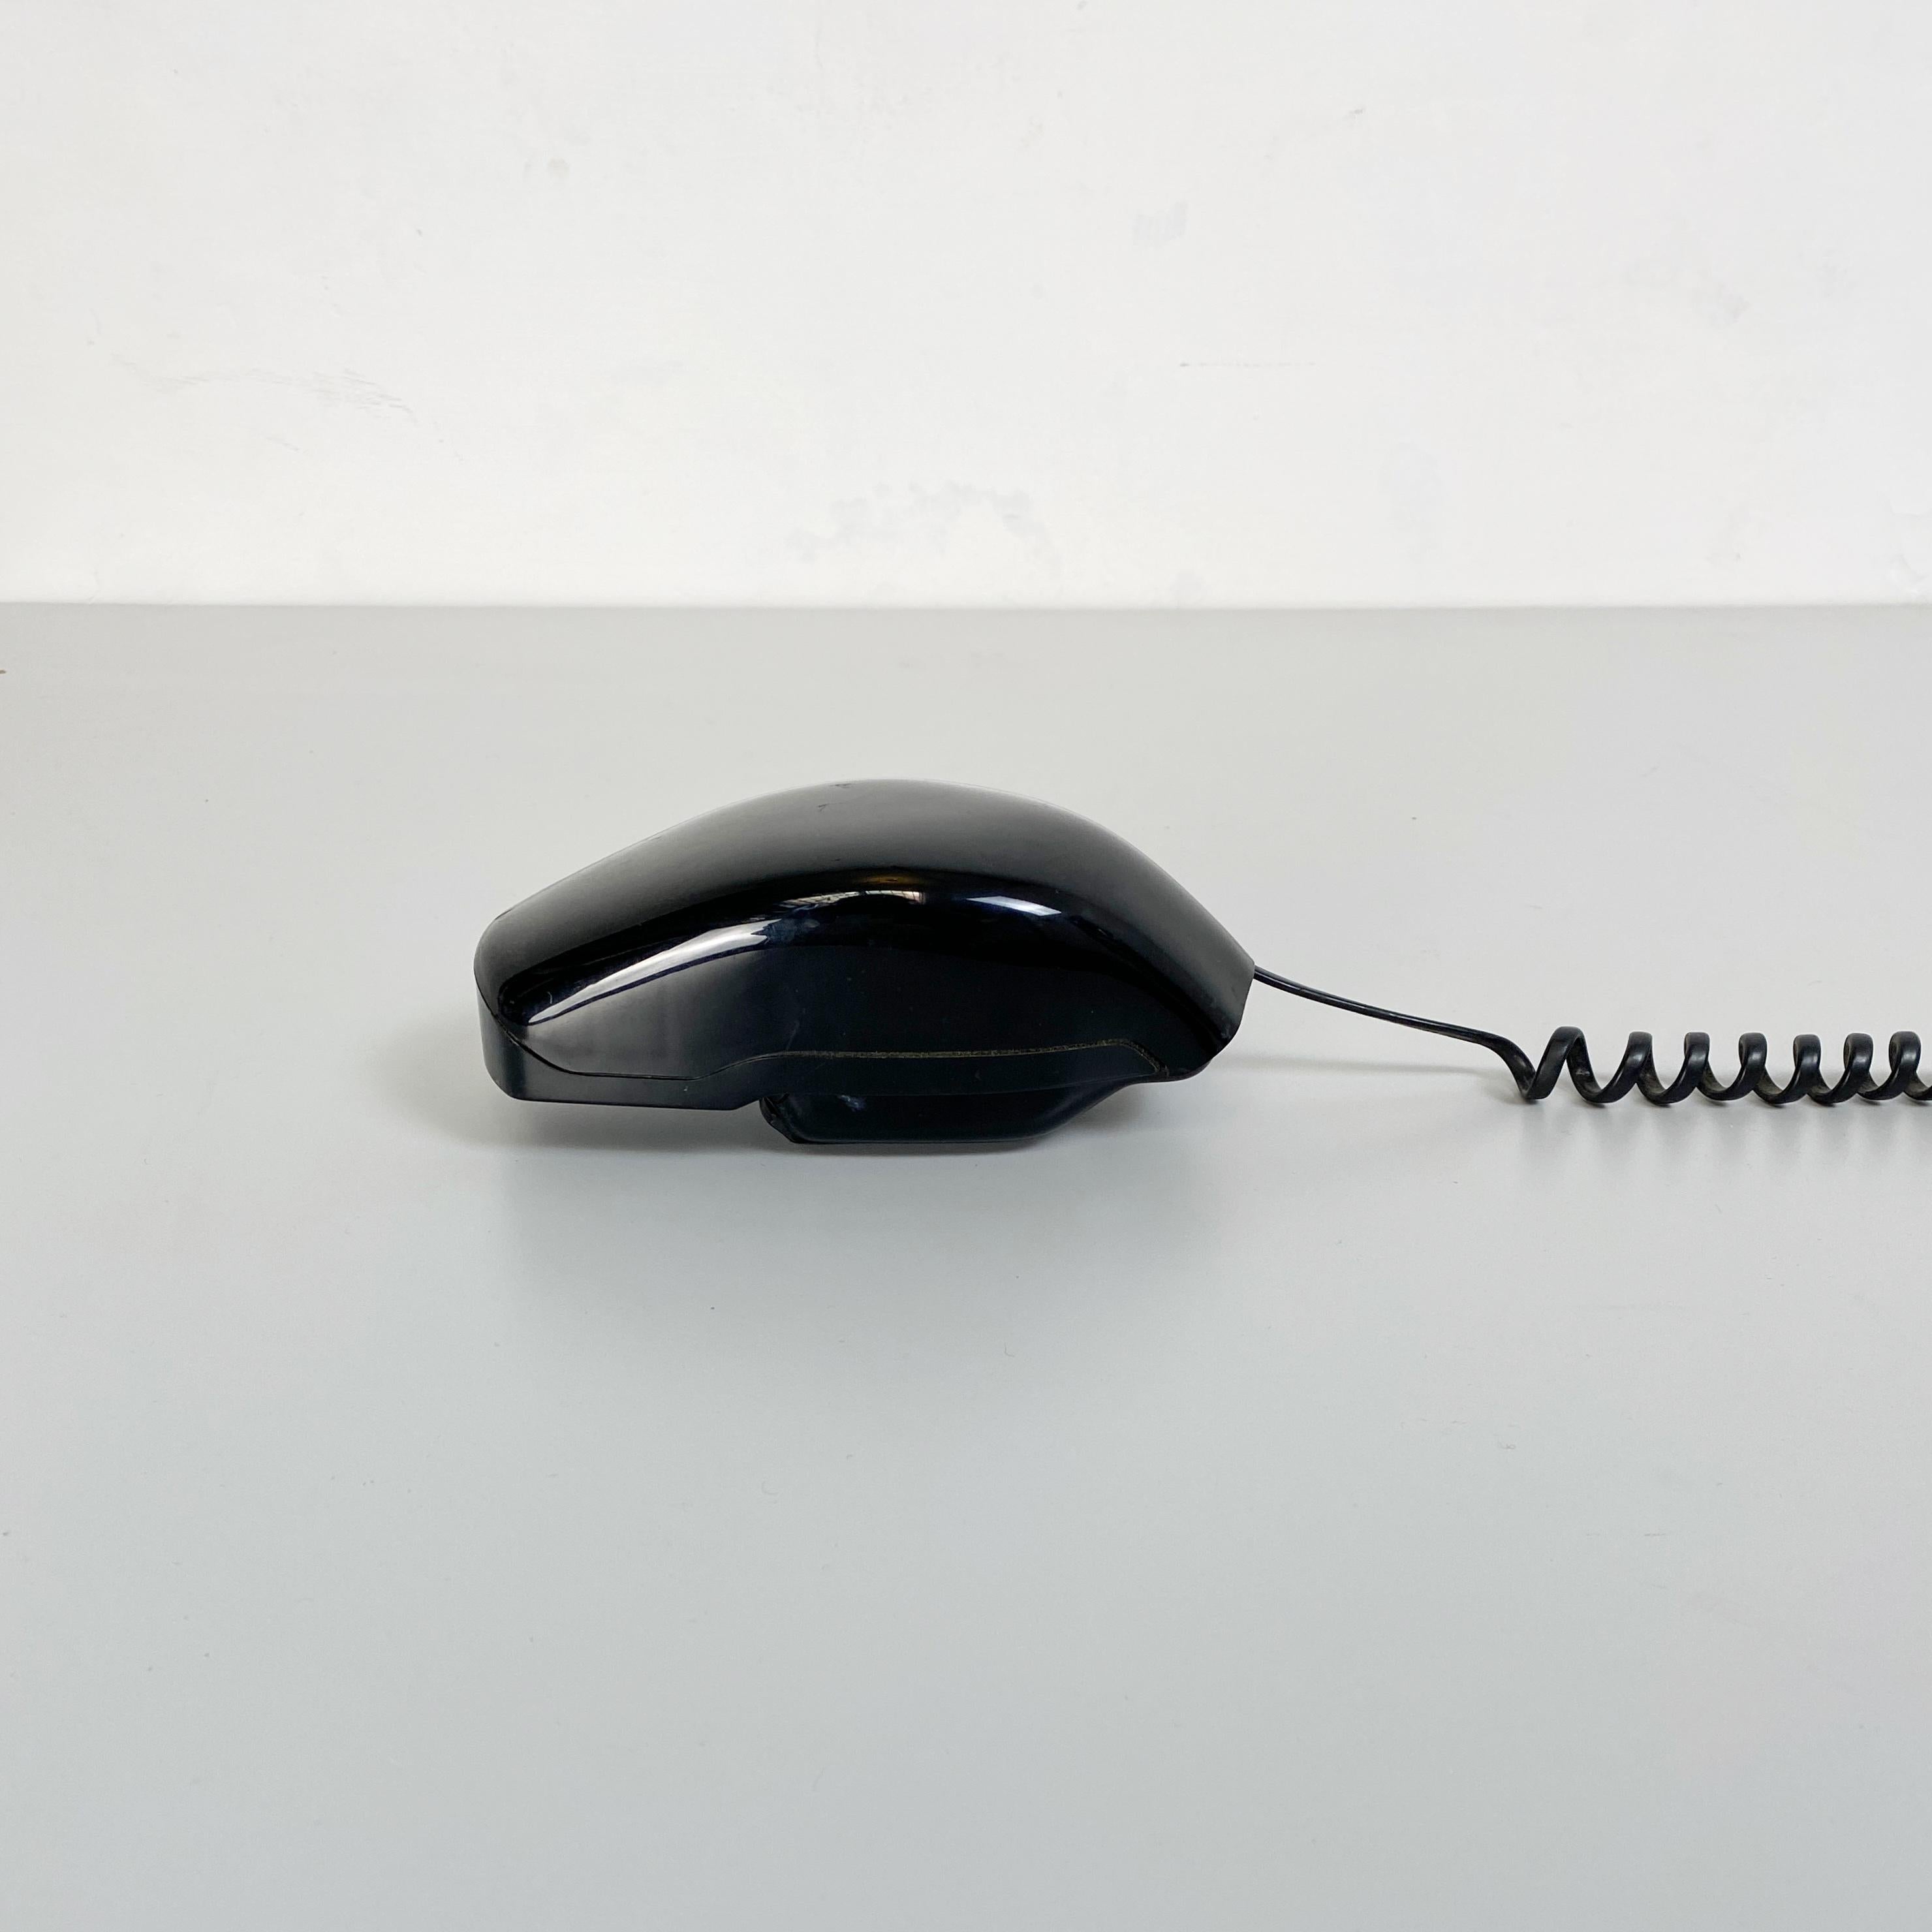 Black telephone Grillo by Marco Zanuso and Richard Sapper for Siemens, 1965
Grillo telephone produced in 1965 for Siemens to a design by Marco Zanuso and Richard Sapper. 
The Telephone won the Compasso d'Oro in 1967 for functionality and